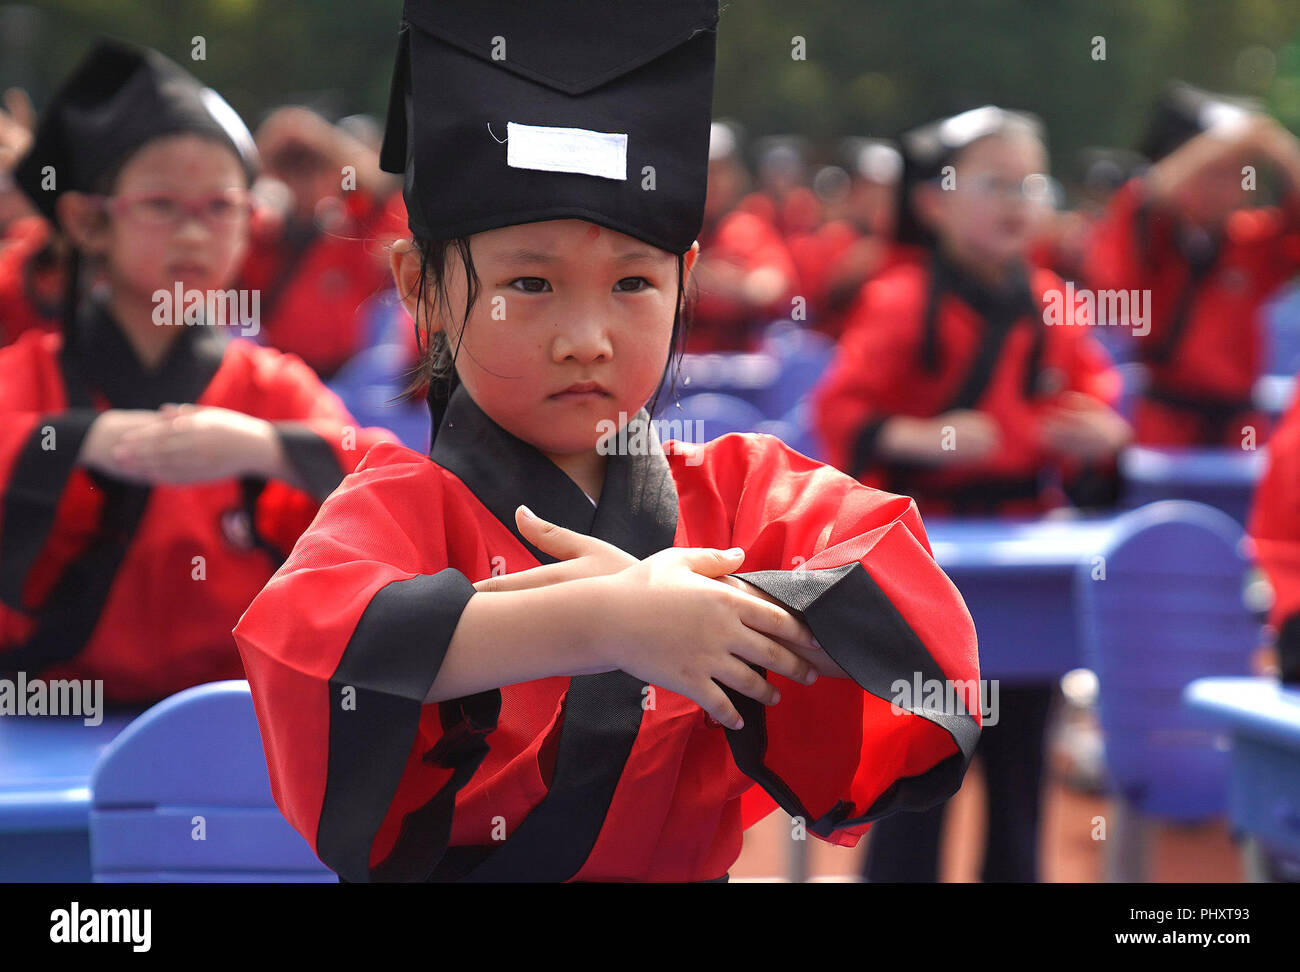 Shanghai, China. 3rd Sep, 2018. Students engage in an activity to pay respects to teachers at a school in Shanghai, east China, Sept. 3, 2018. Schools all over the country prepare various activities for students to greet the new semester. Credit: Chen Fei/Xinhua/Alamy Live News Stock Photo